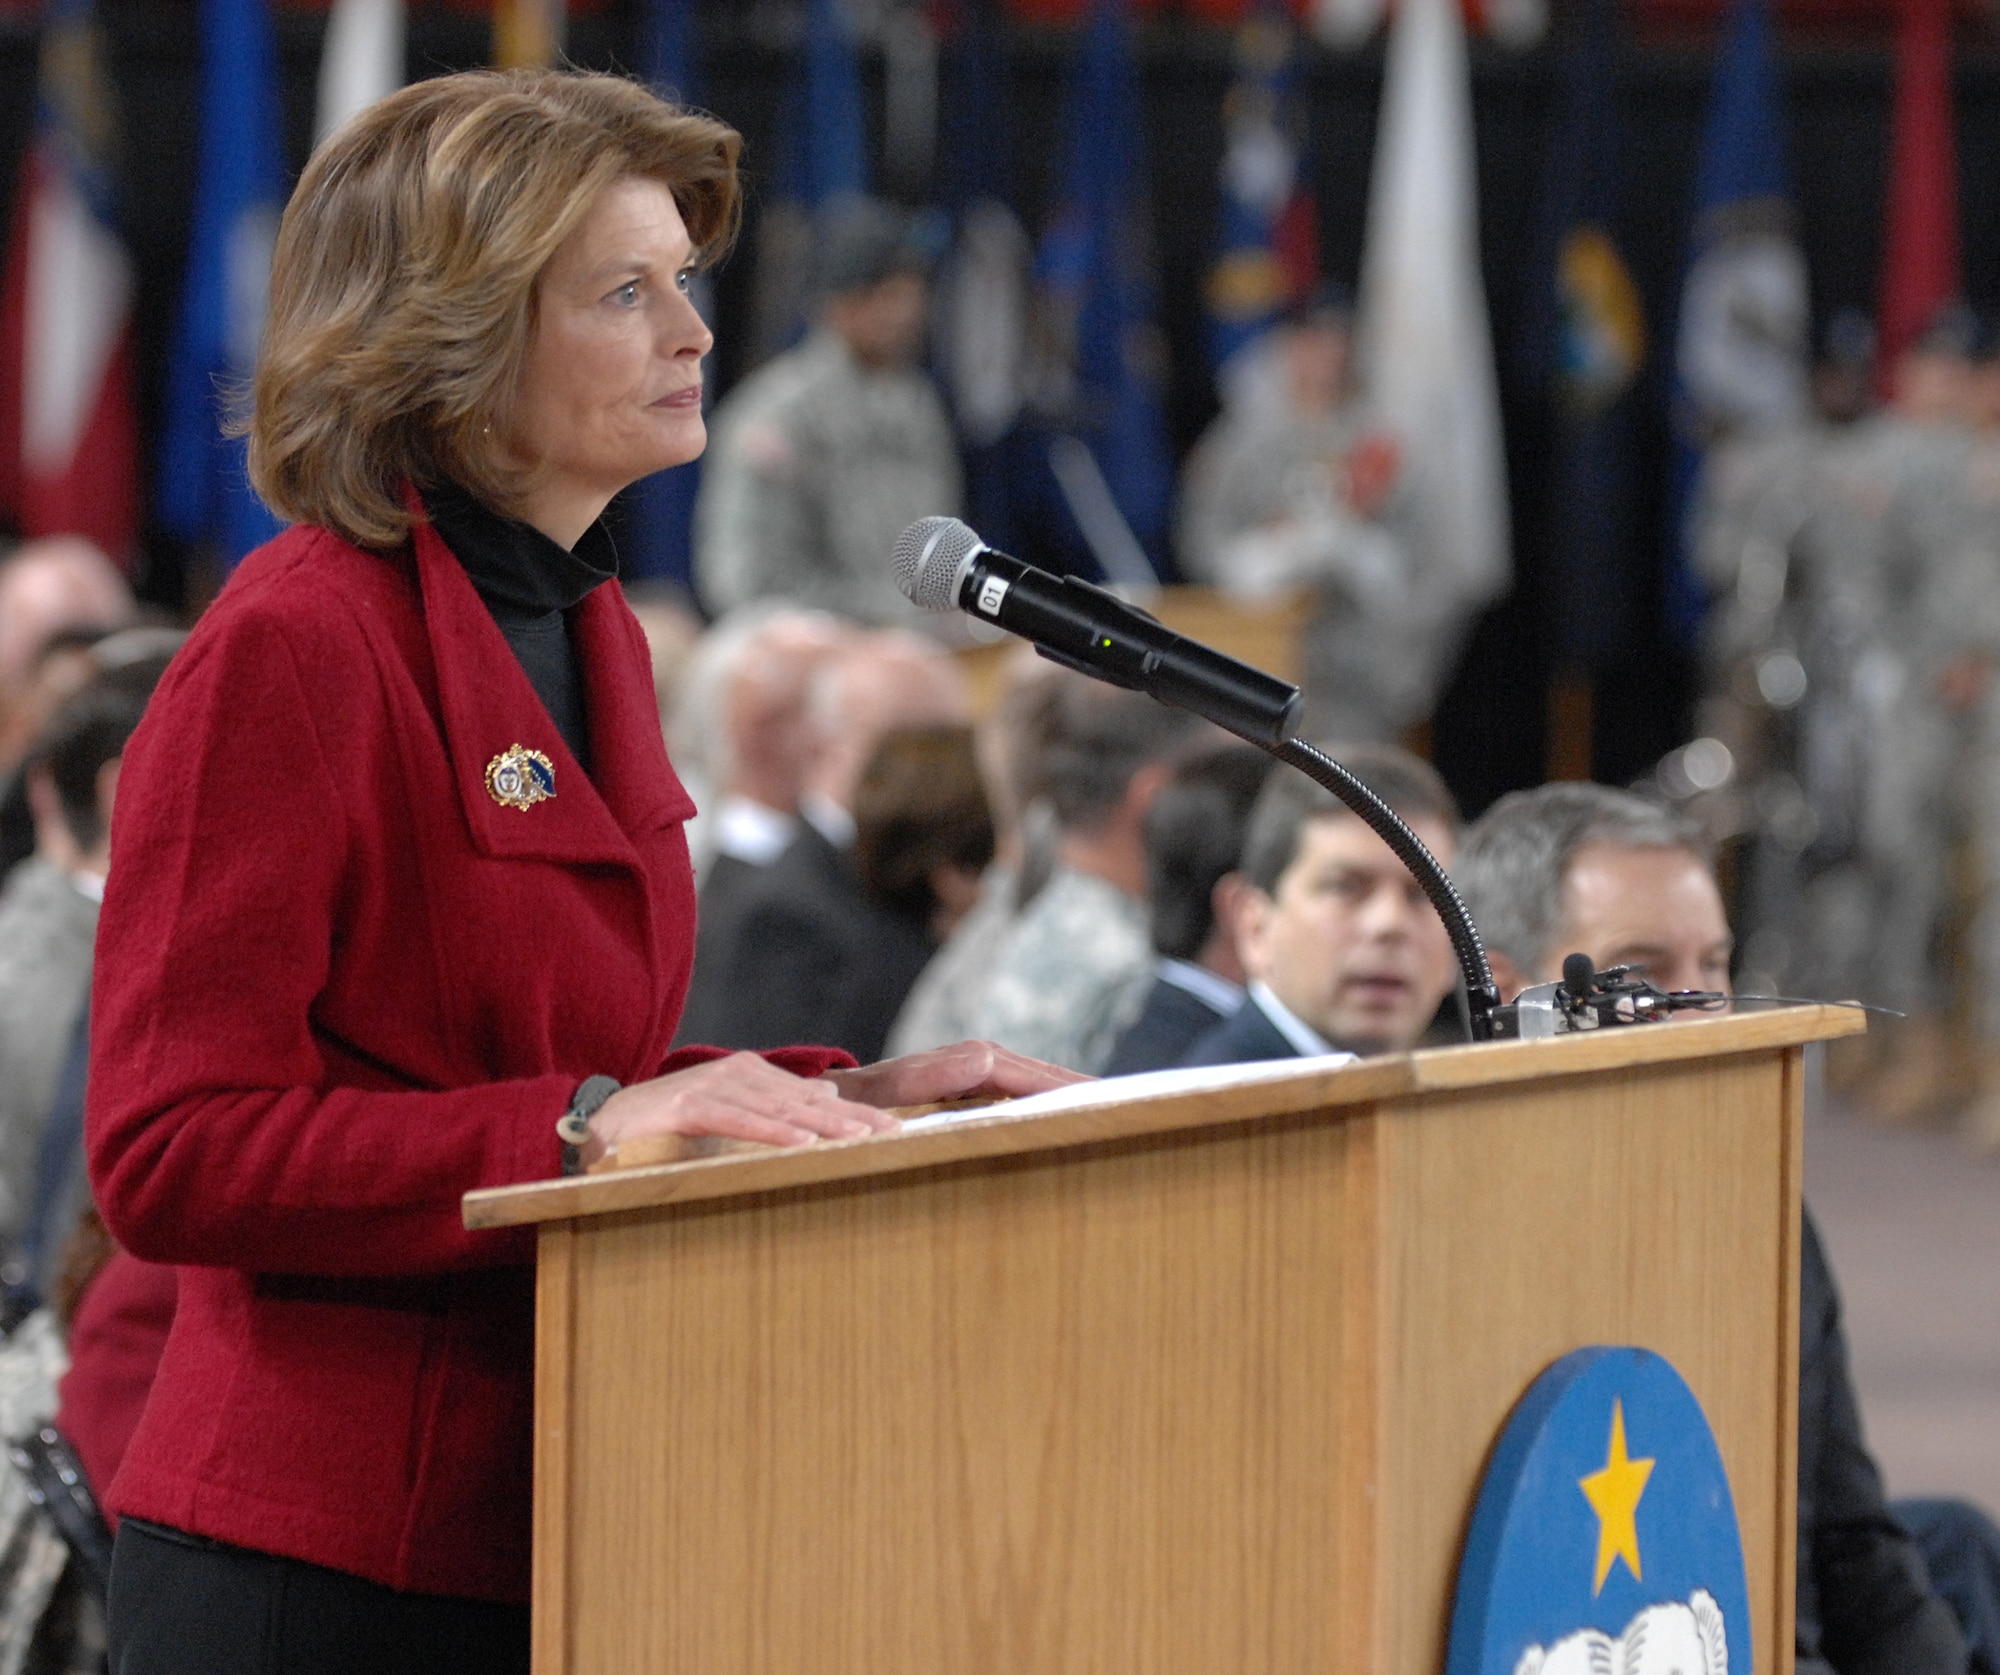 Senator Lisa Murkowski speaks to Soldiers of the 4th Brigade Combat Team (Airborne), 25th Infantry Division during a deployment ceremony at Sullivan Arena, Anchorage, Alaska Nov. 29, 2011.  The 4-25th ABCT, "Spartan Brigade," will deploy 3,500 Soldiers on a series of flights in November and December en route to Afghanistan. (U.S. Air Force photo/Staff Sgt. Zachary Wolf)